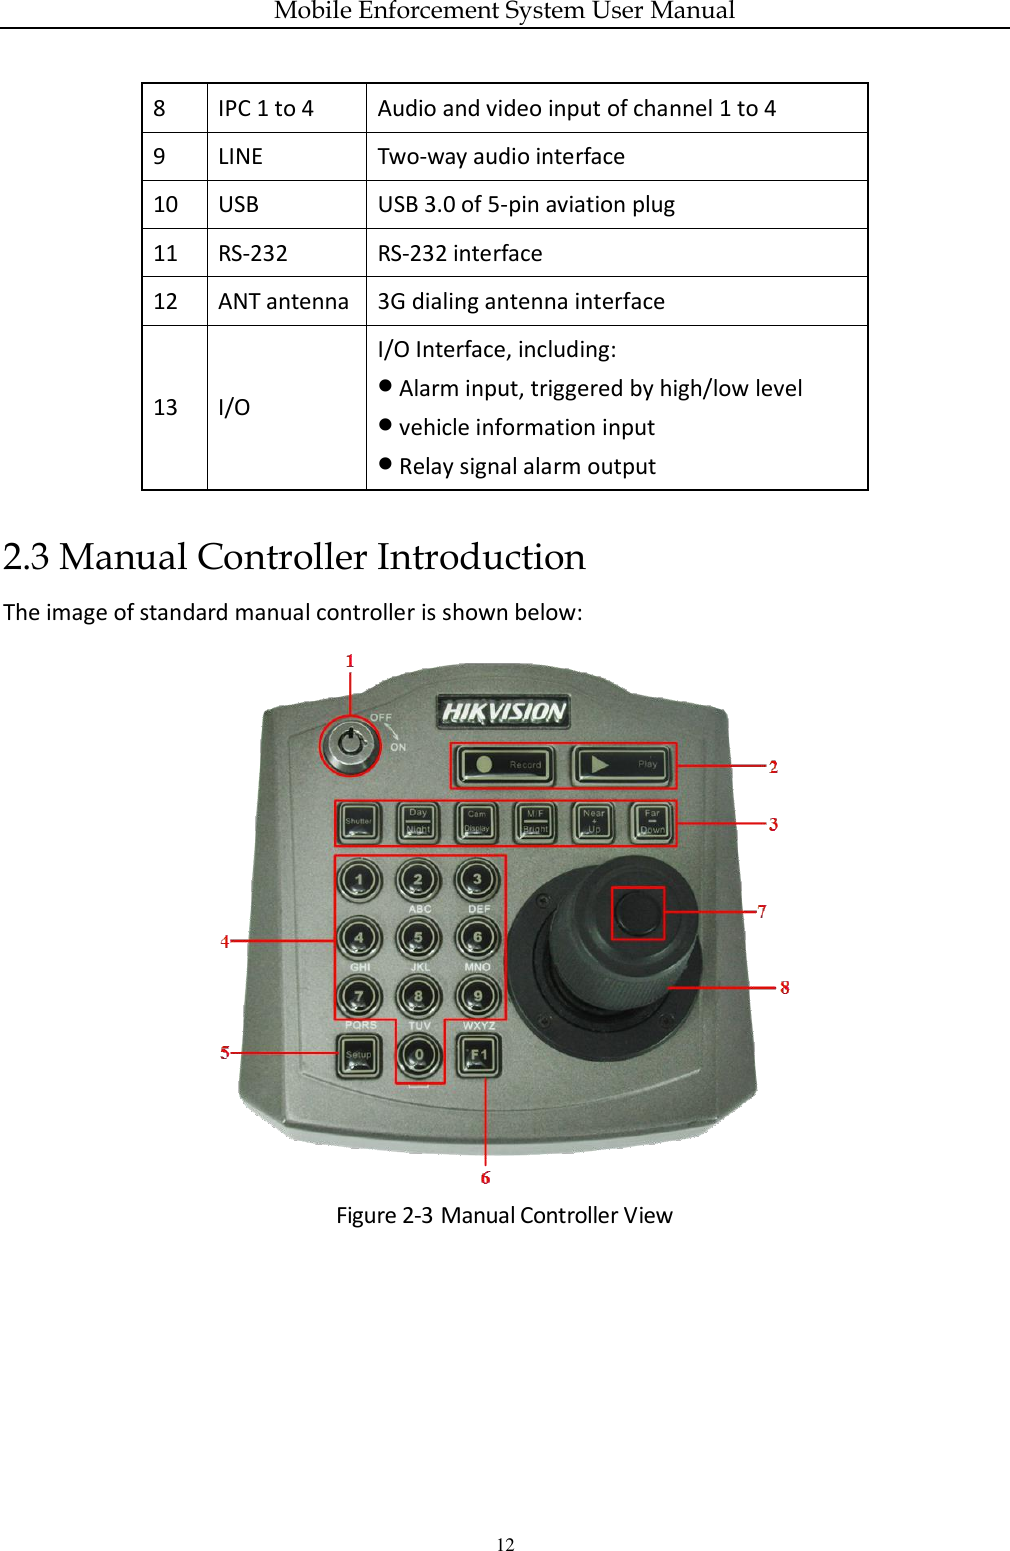 Mobile Enforcement System User Manual 12  2.3 Manual Controller Introduction The image of standard manual controller is shown below:  Figure 2-3 Manual Controller View 8  IPC 1 to 4  Audio and video input of channel 1 to 4 9  LINE  Two-way audio interface 10  USB  USB 3.0 of 5-pin aviation plug   11 RS-232  RS-232 interface 12  ANT antenna  3G dialing antenna interface  13  I/O I/O Interface, including:  Alarm input, triggered by high/low level  vehicle information input  Relay signal alarm output 